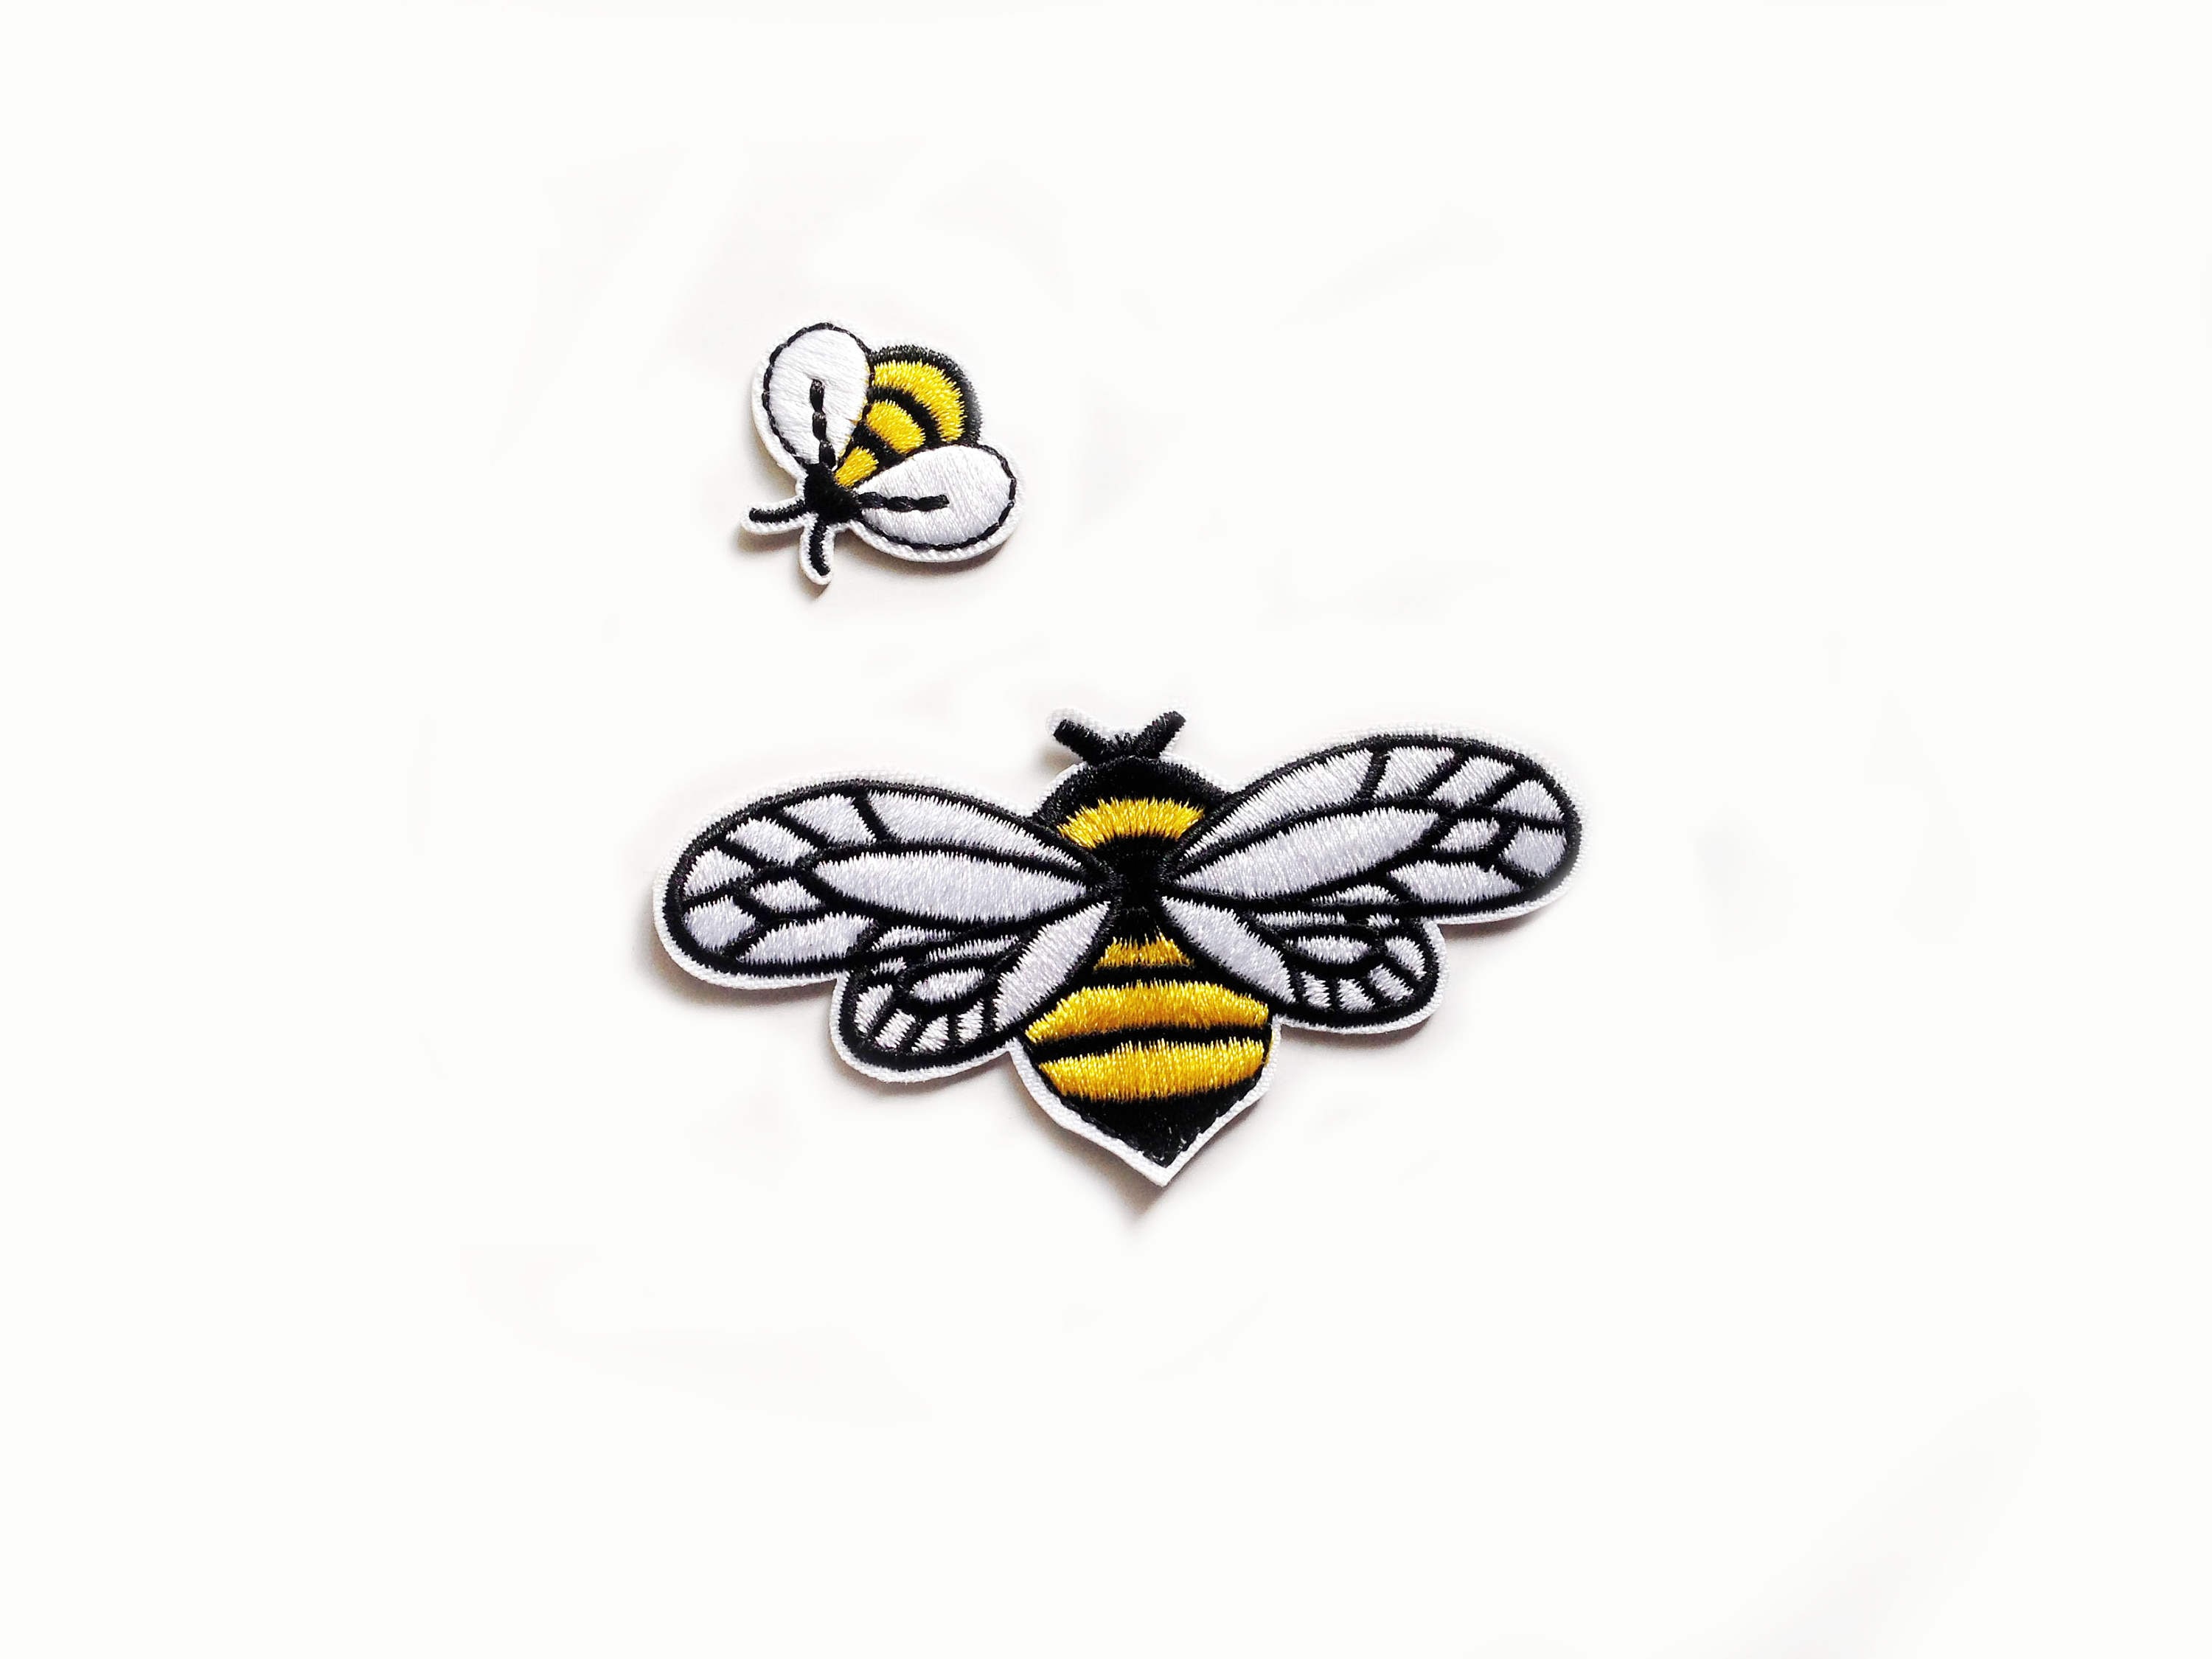 set of flying bees PATCHES Embroidery badge Iron On Embroidered Applique black yellow white insect cute